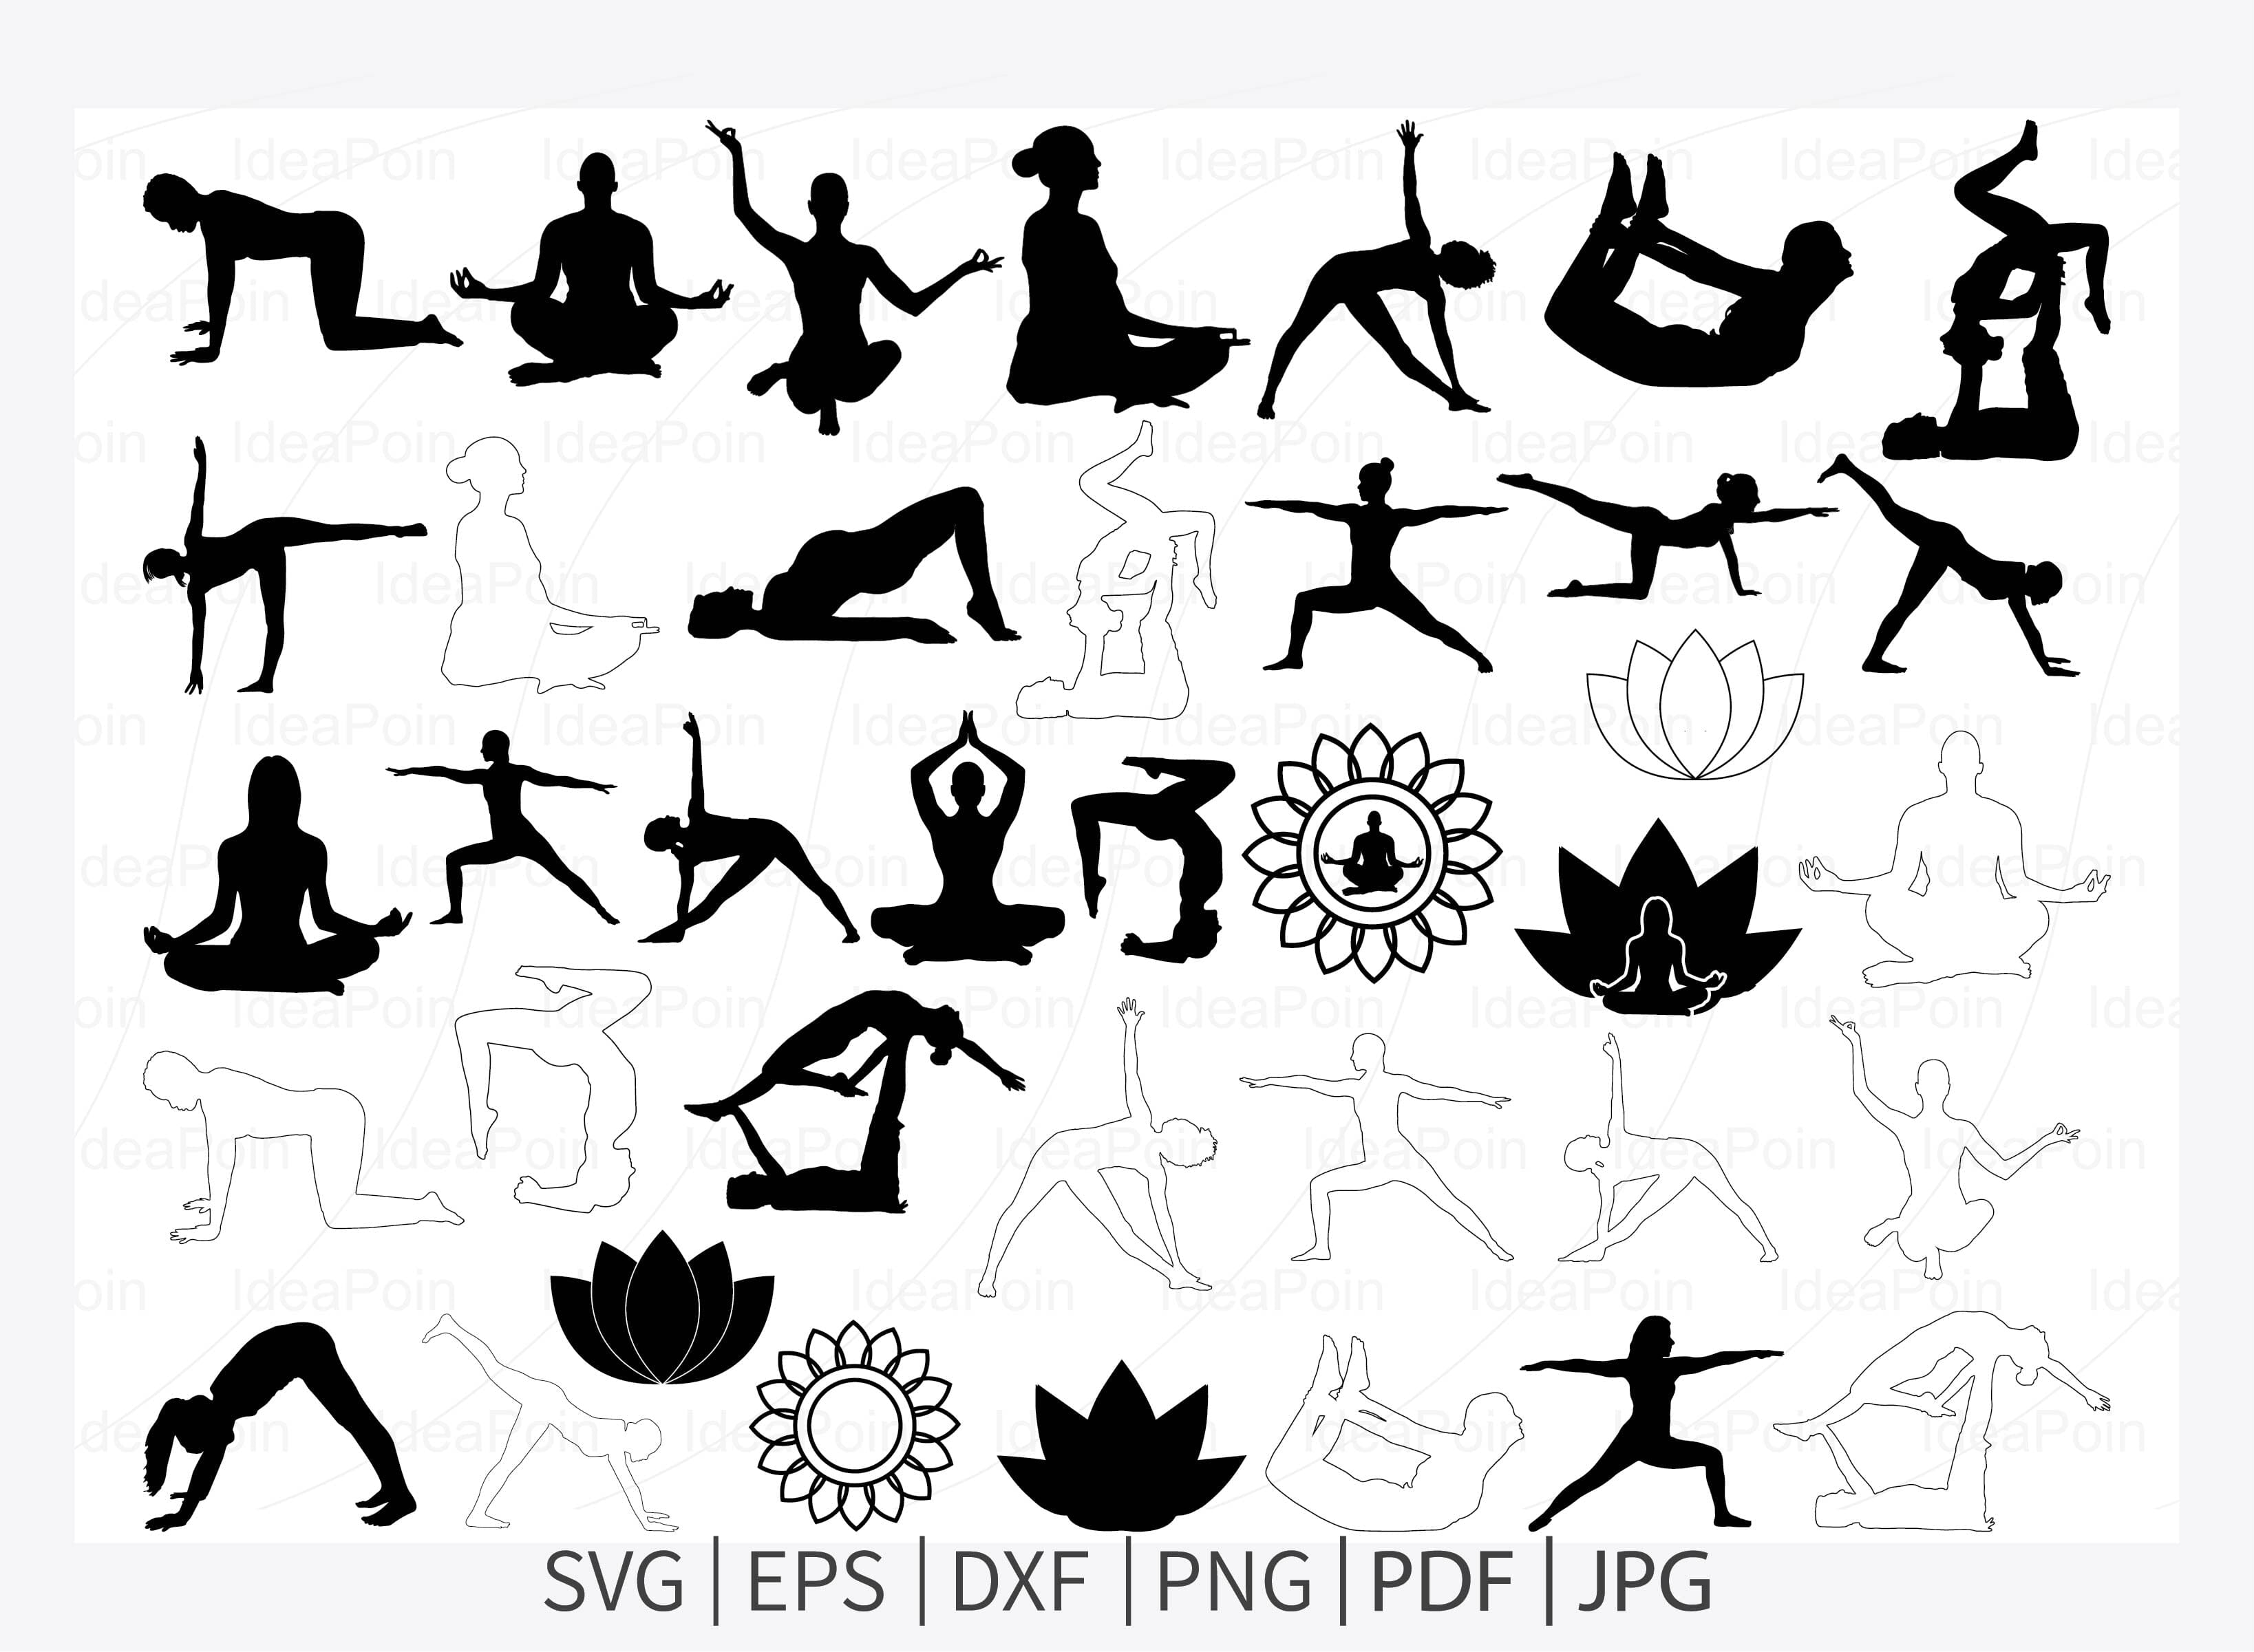 Yoga Poses Bullet Journaling Stencil is Great for Planning Your Yoga  Practice in Your Bujo. Get It Here. - Etsy